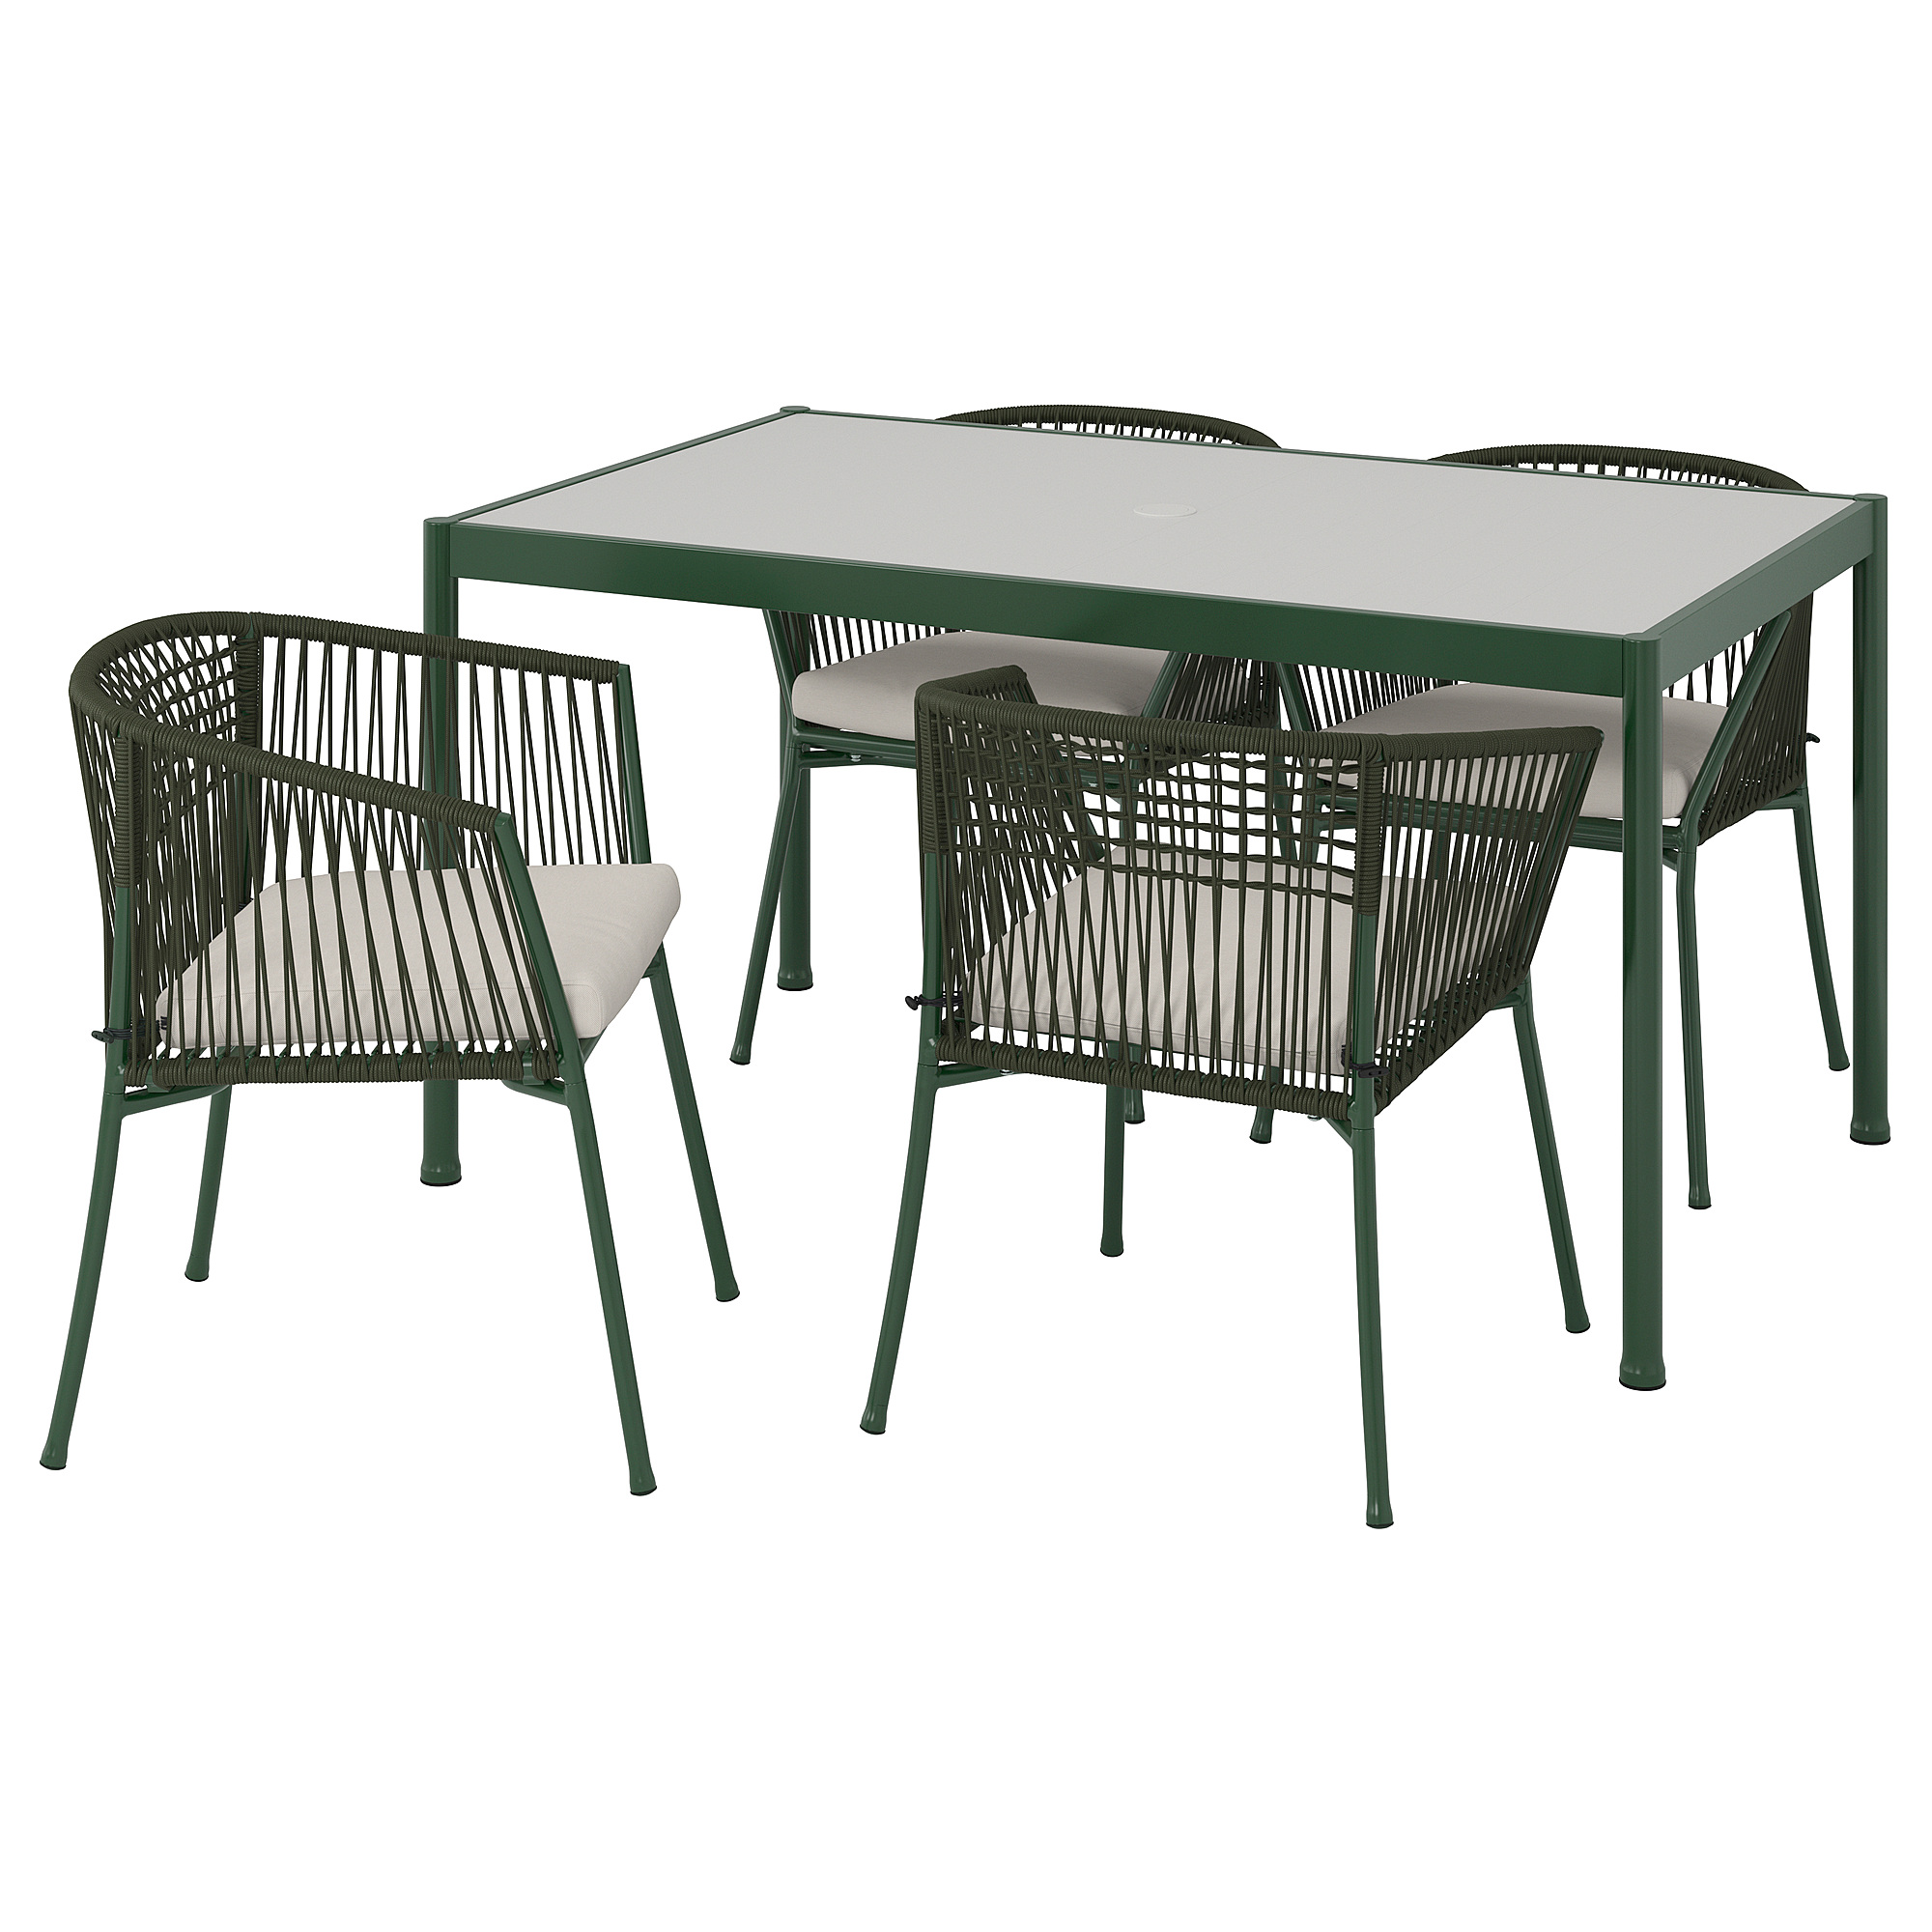 SEGERÖN table and 4 chairs with armrests